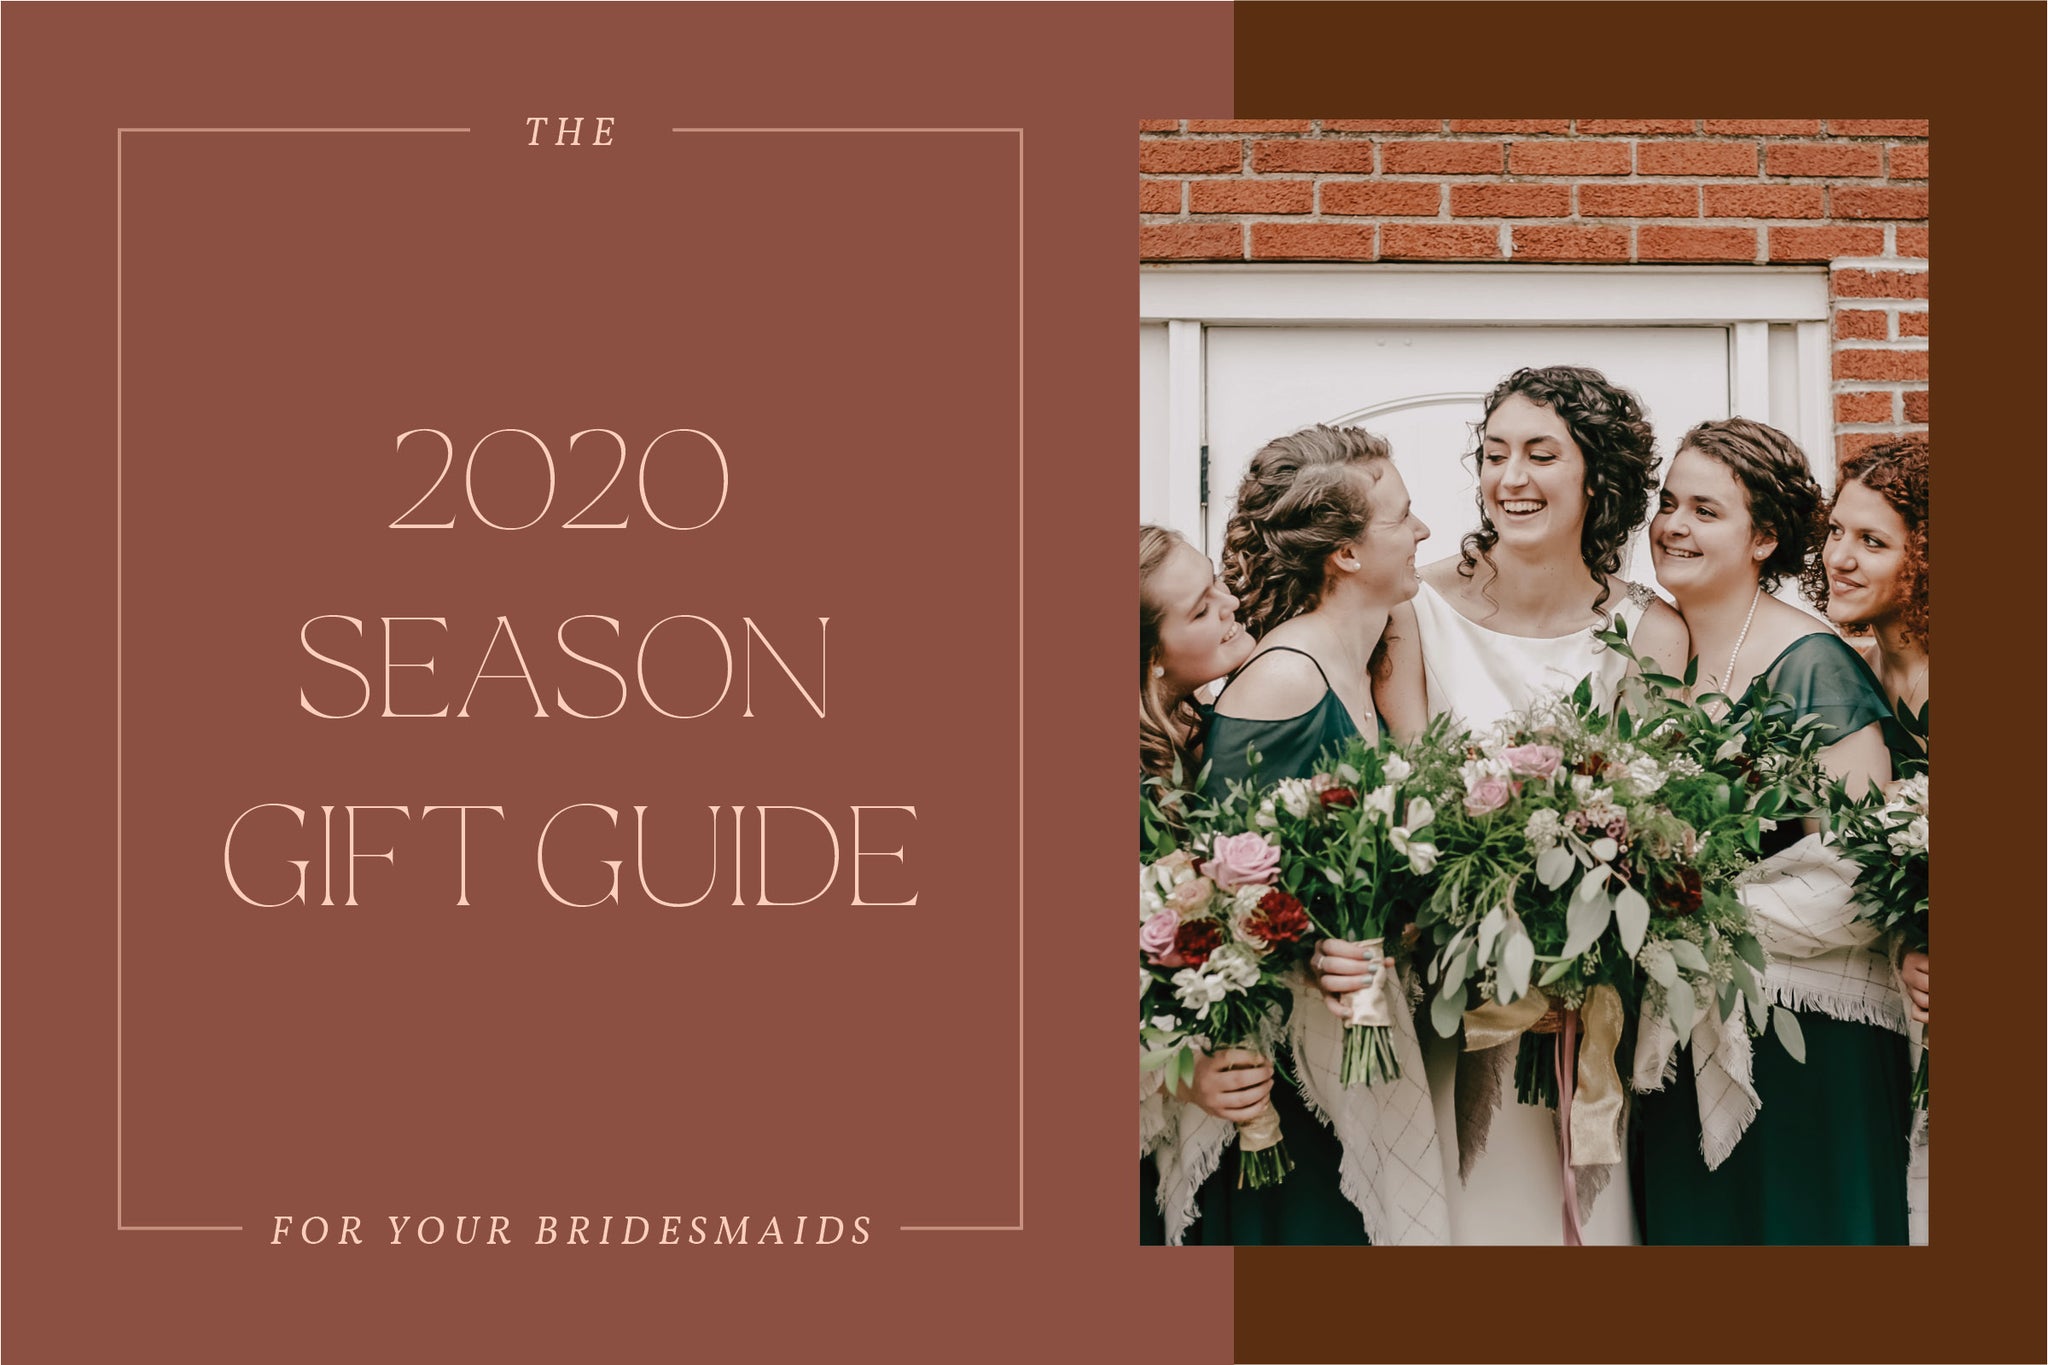 The 2020 Season Gift Guide for Your Bridesmaids